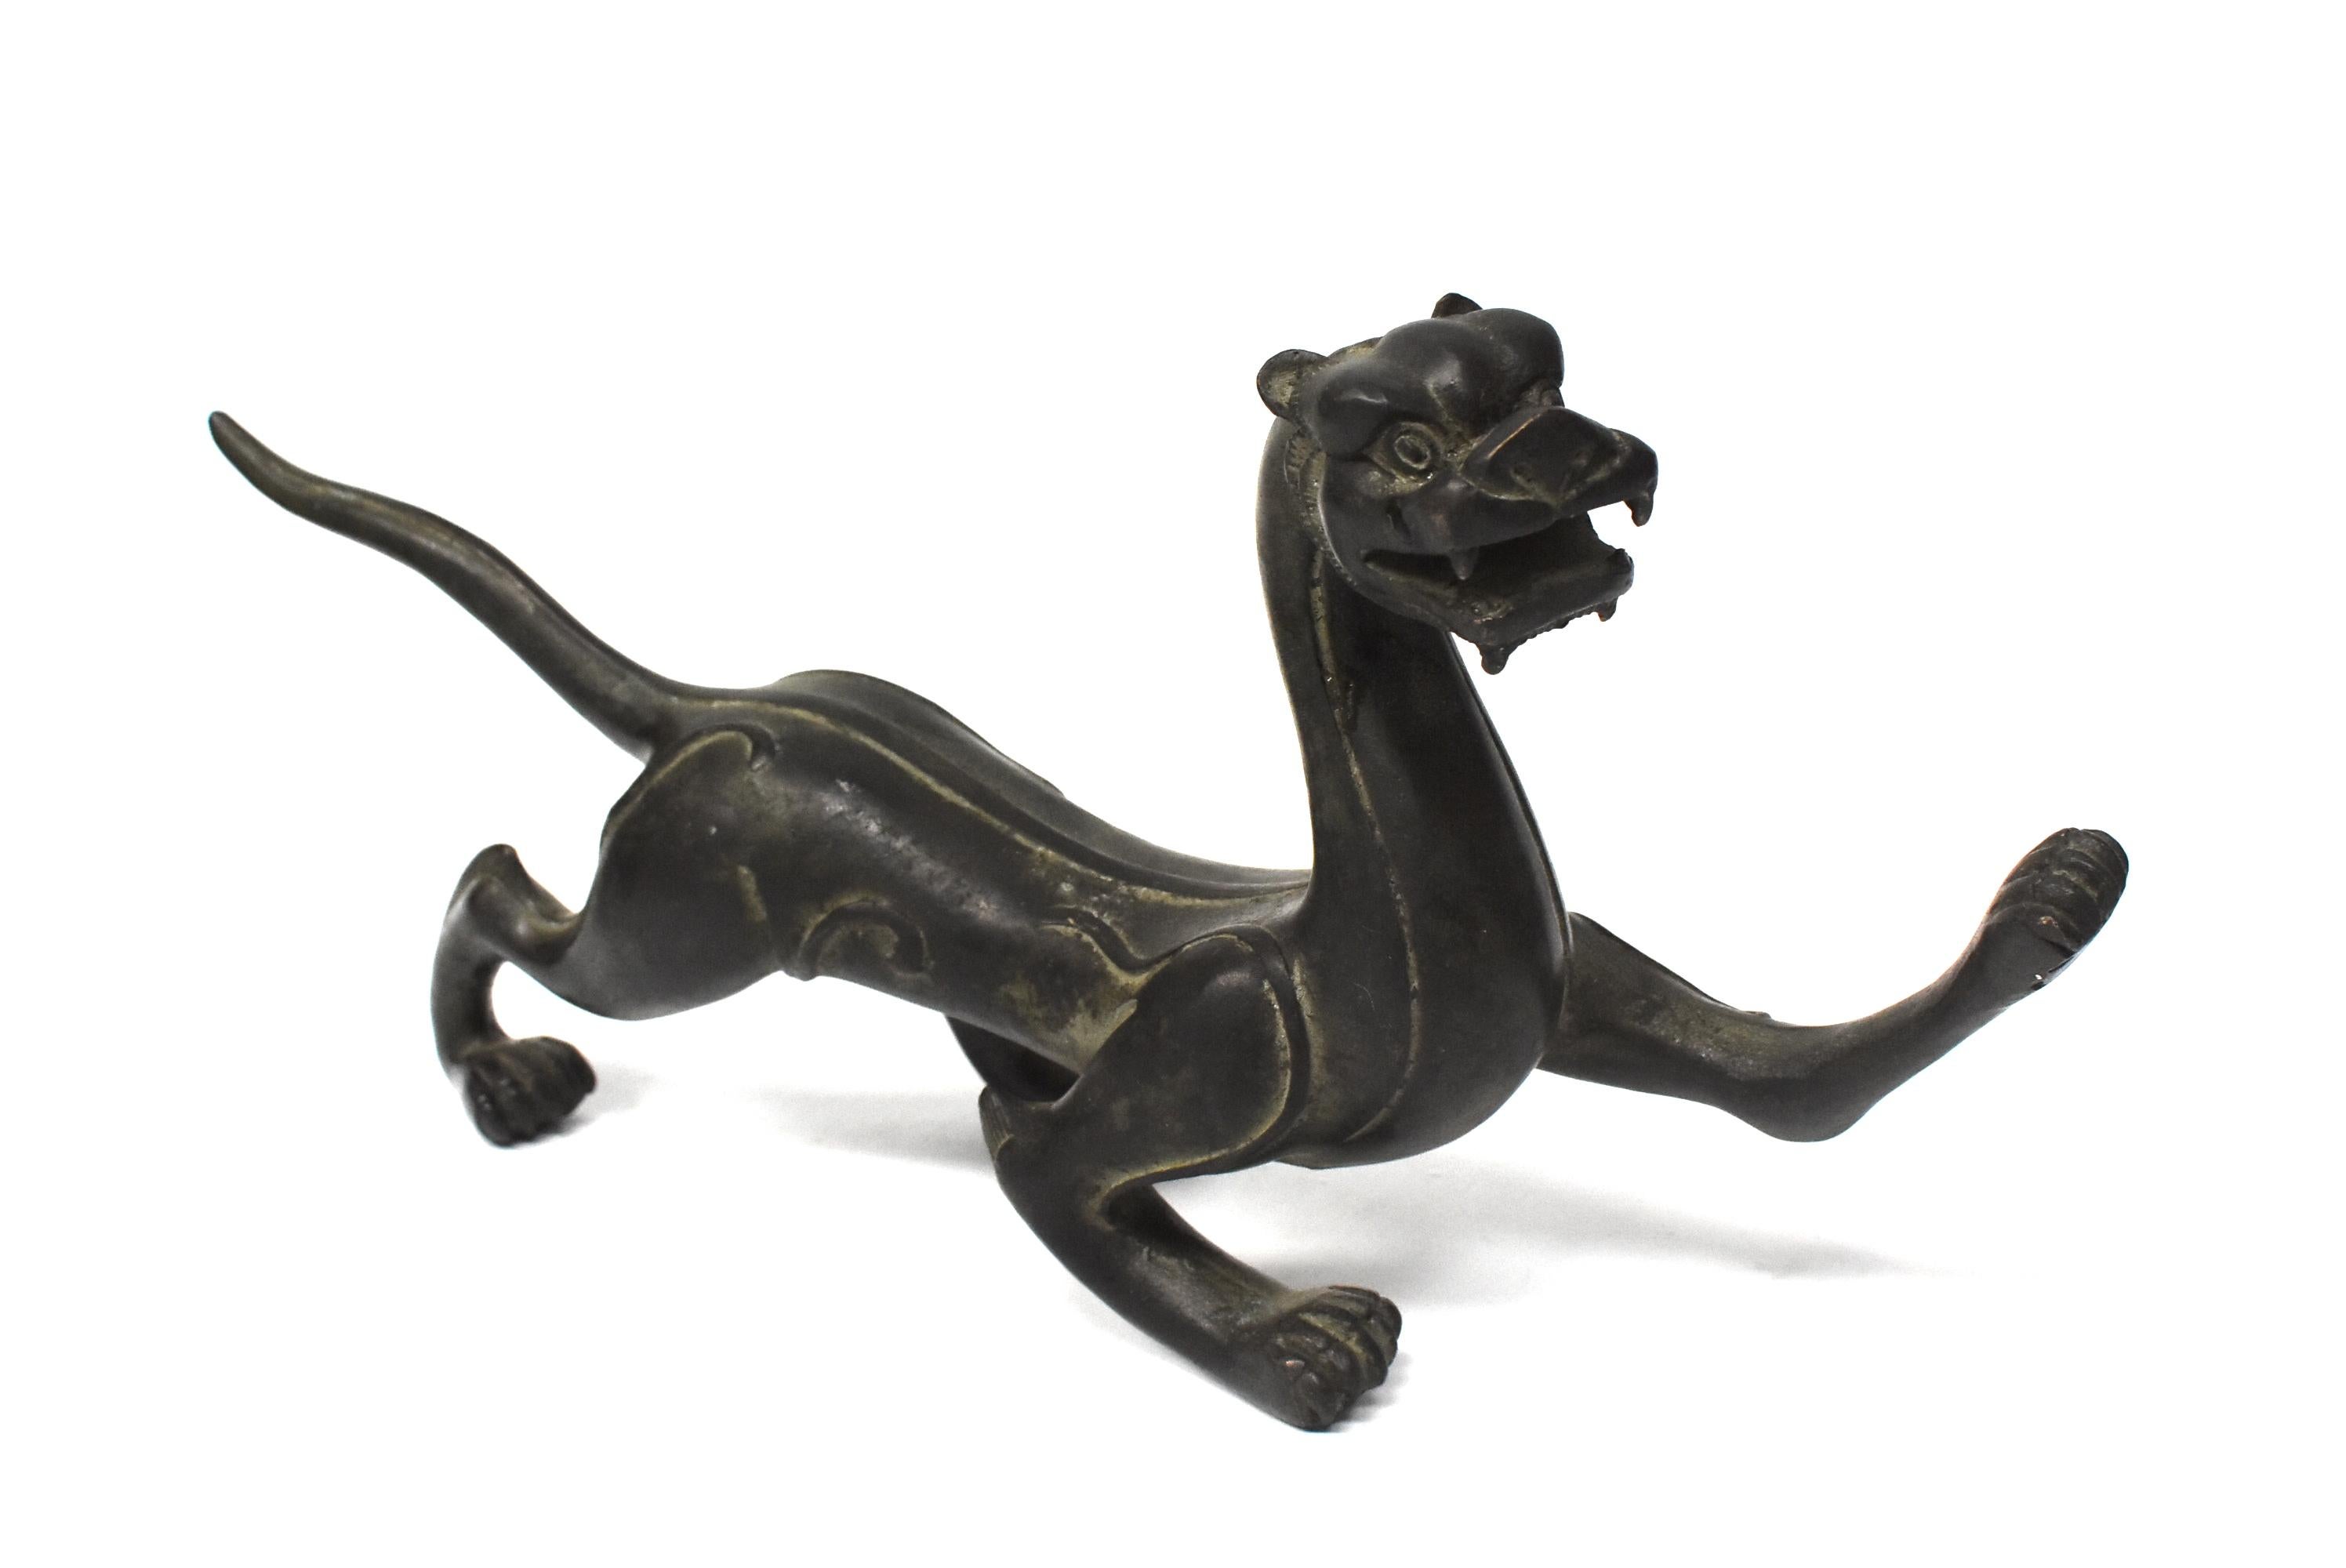 The dragon is the most important symbol in Chinese culture. A sign used by the Emperors, it represents power, leadership and prosperity. This wonderful sculpture captures the dragon in motion. The style is typical Han, which depicts a dragon with